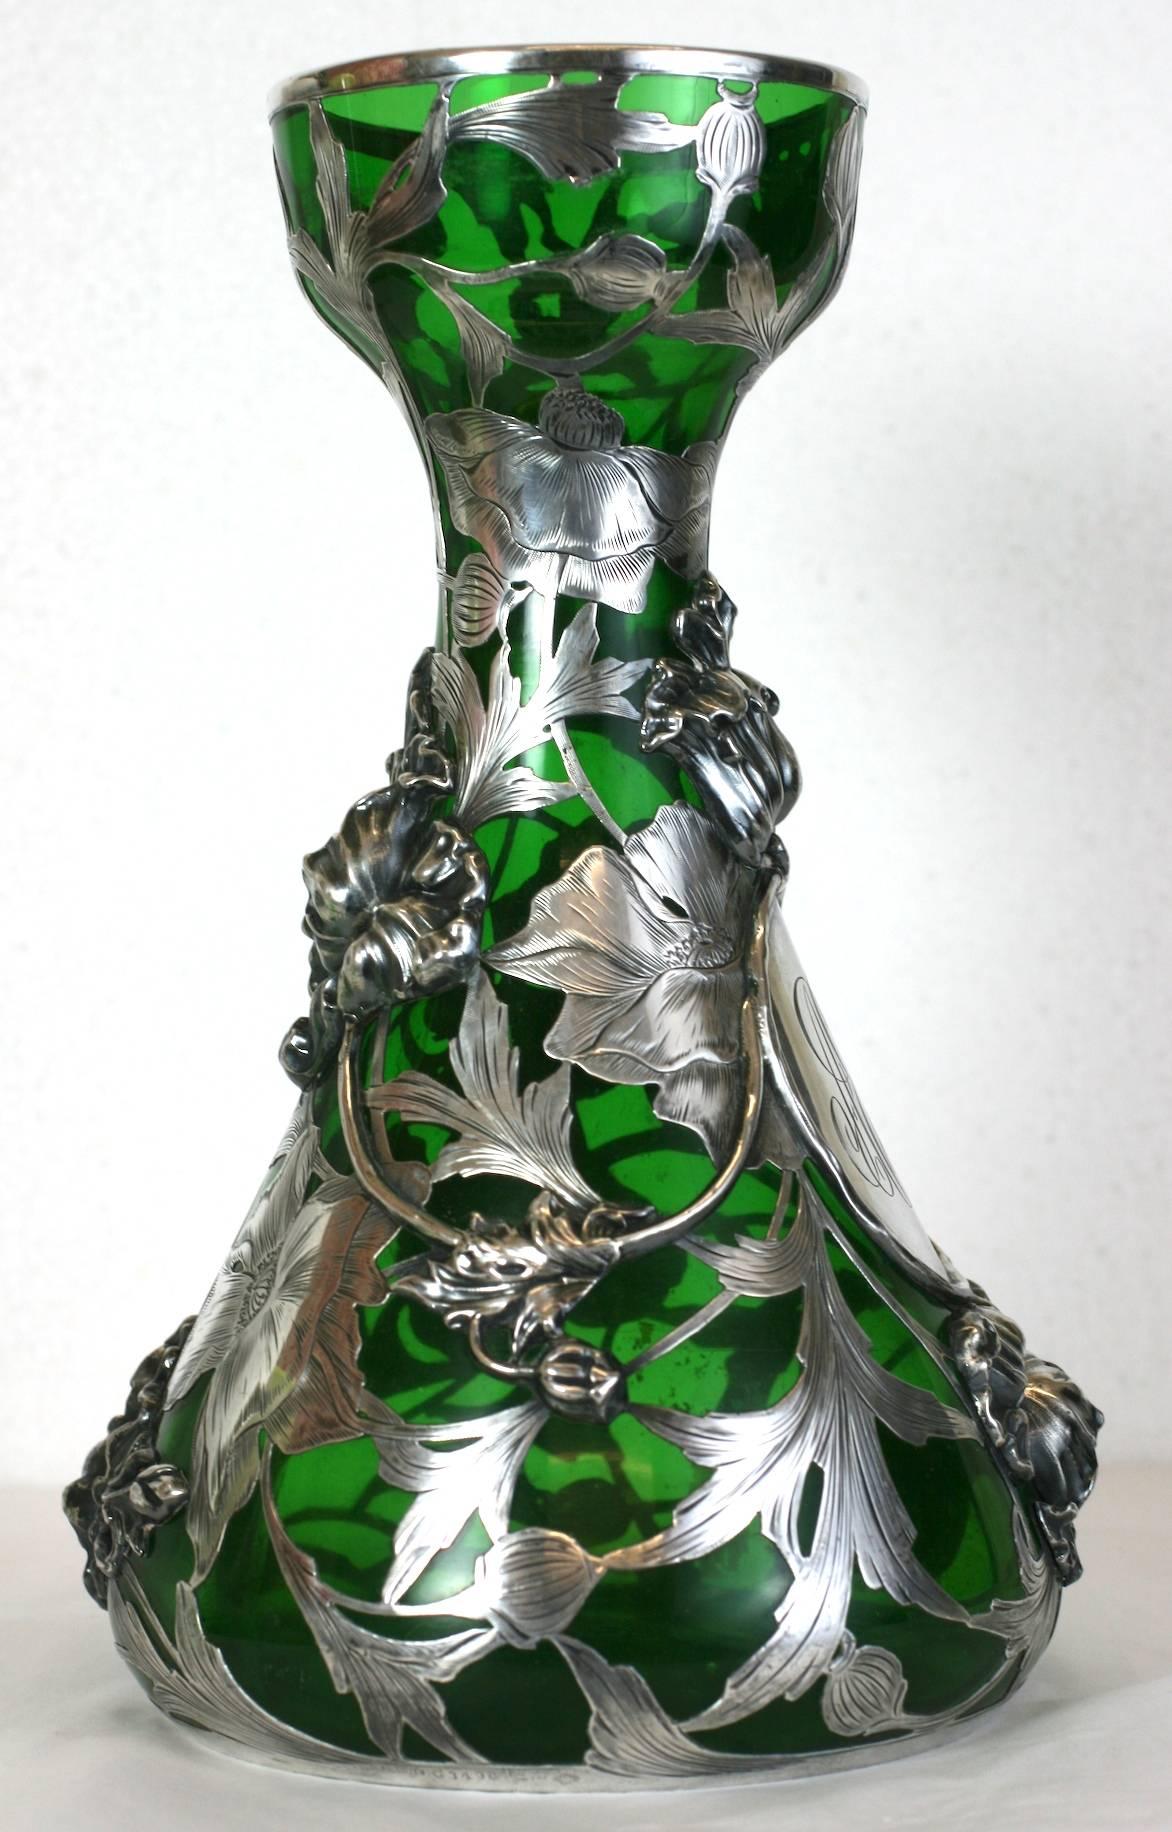 Exceptionally rare silver overlay vase by Alvin Mfg Co. of Providence Rhode Island from the late 19th century. 
This vase is a tour de force of Art Nouveau silver work on glass. The intricate sterling floral base design is overlaid onto the emerald